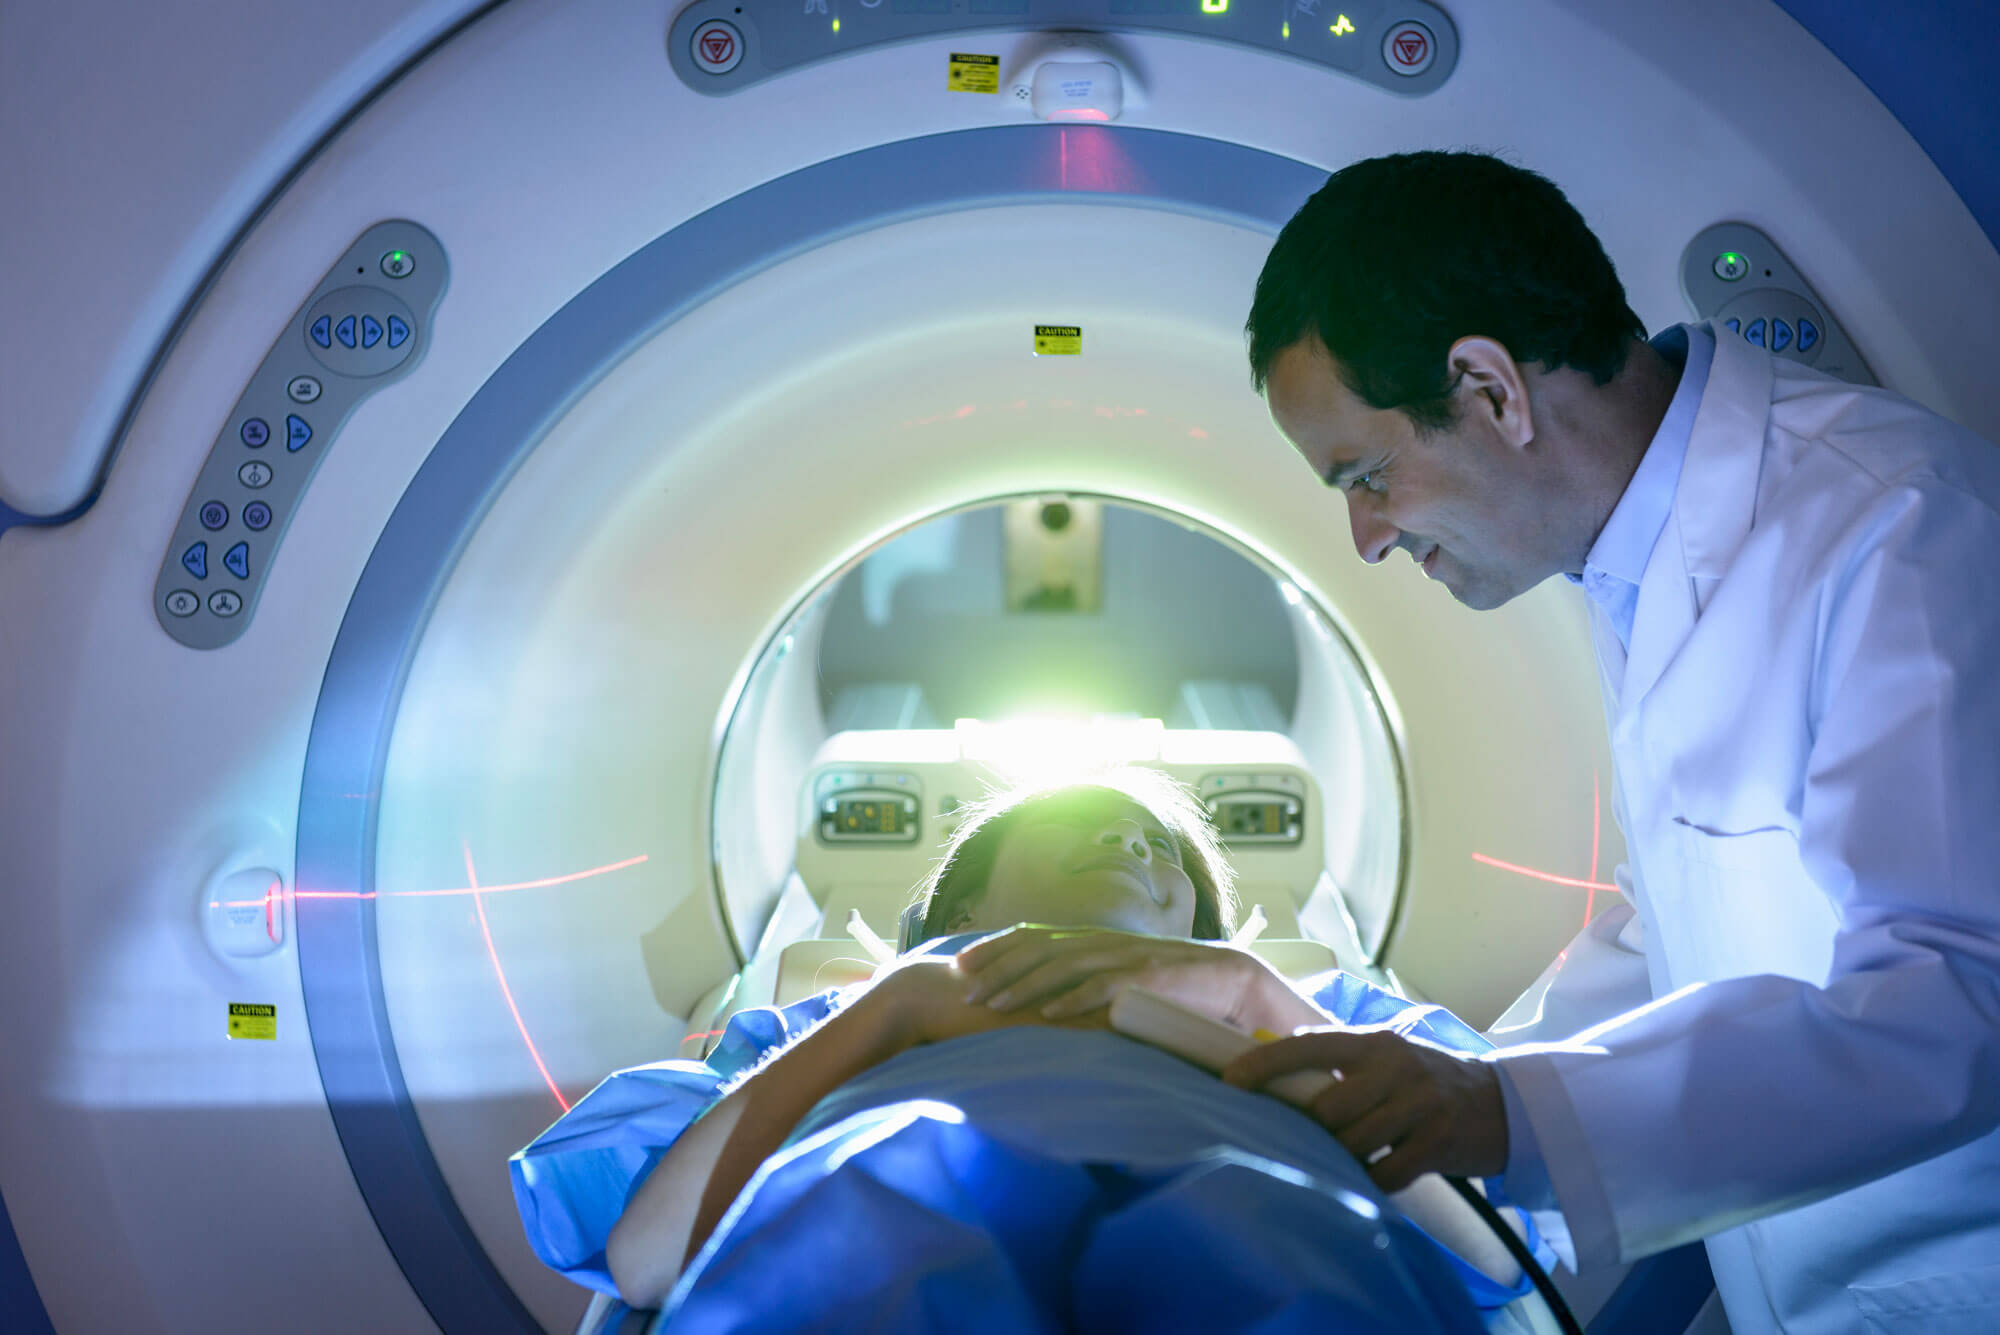   Our Services   We provide the most advanced, safe, and accessible general diagnostic and subspecialty radiology services in the North, East, and South Bay.    Services  